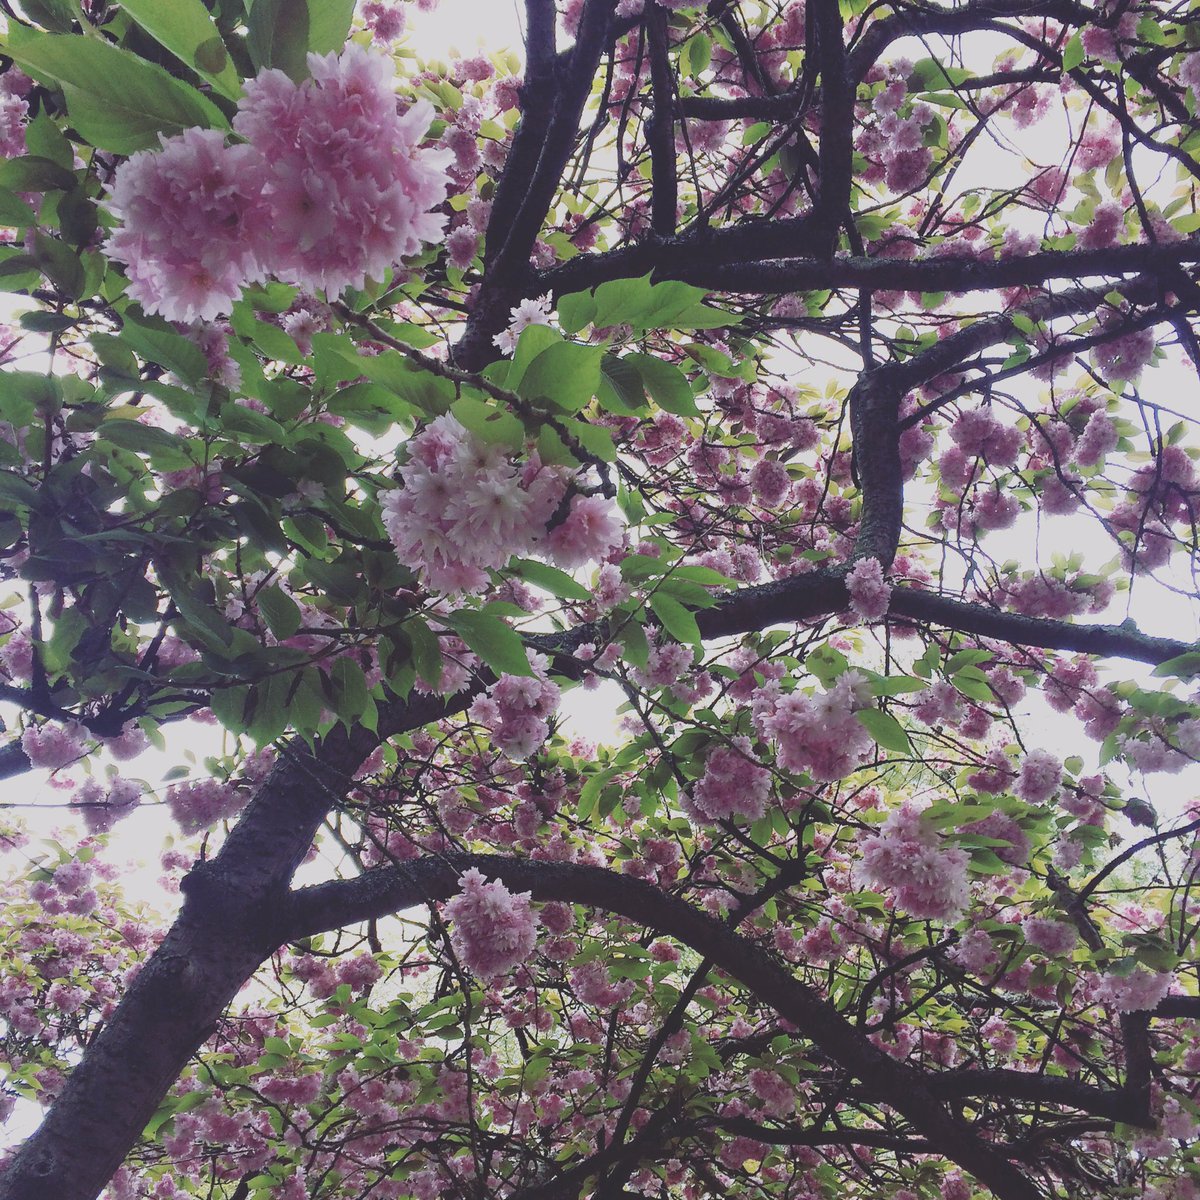 Really going to miss this beautiful #blossom when summer comes 🌸 #henriettapark #prettyinpink #sundaystrolling